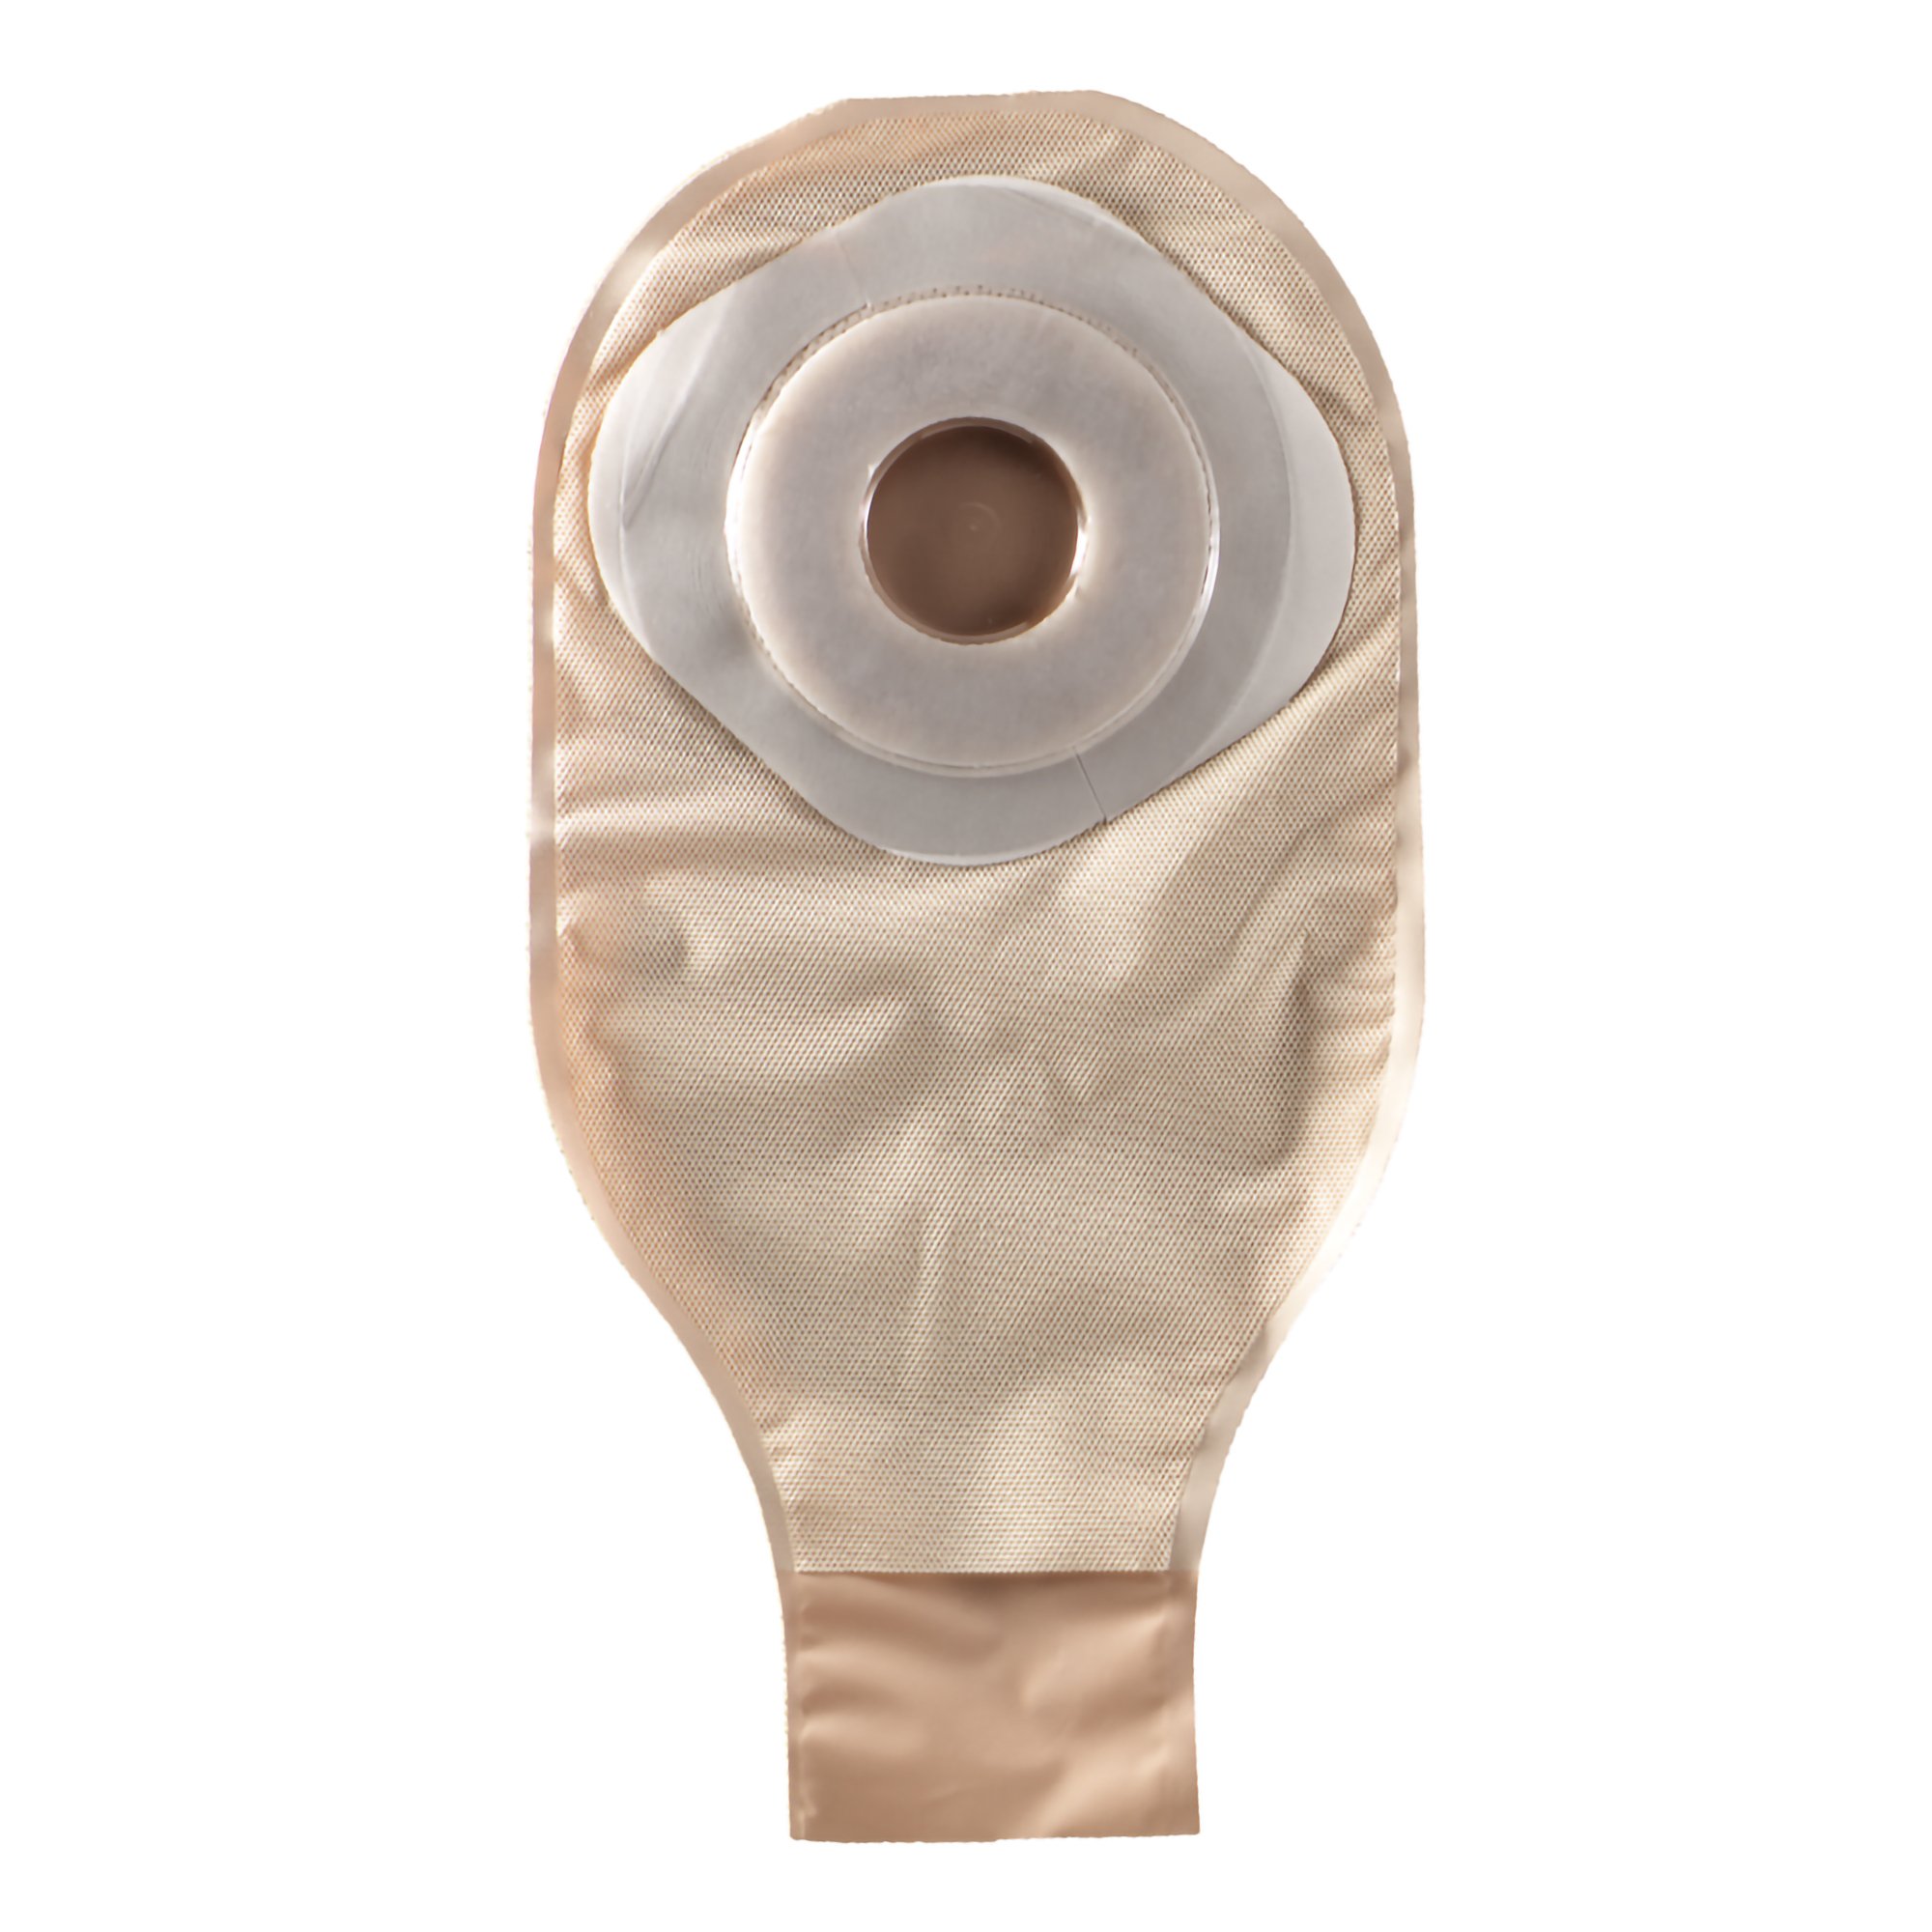 ActiveLife One-Piece Drainable Opaque Colostomy Pouch, 12 Inch Length, 2 Inch Stoma MK 207695